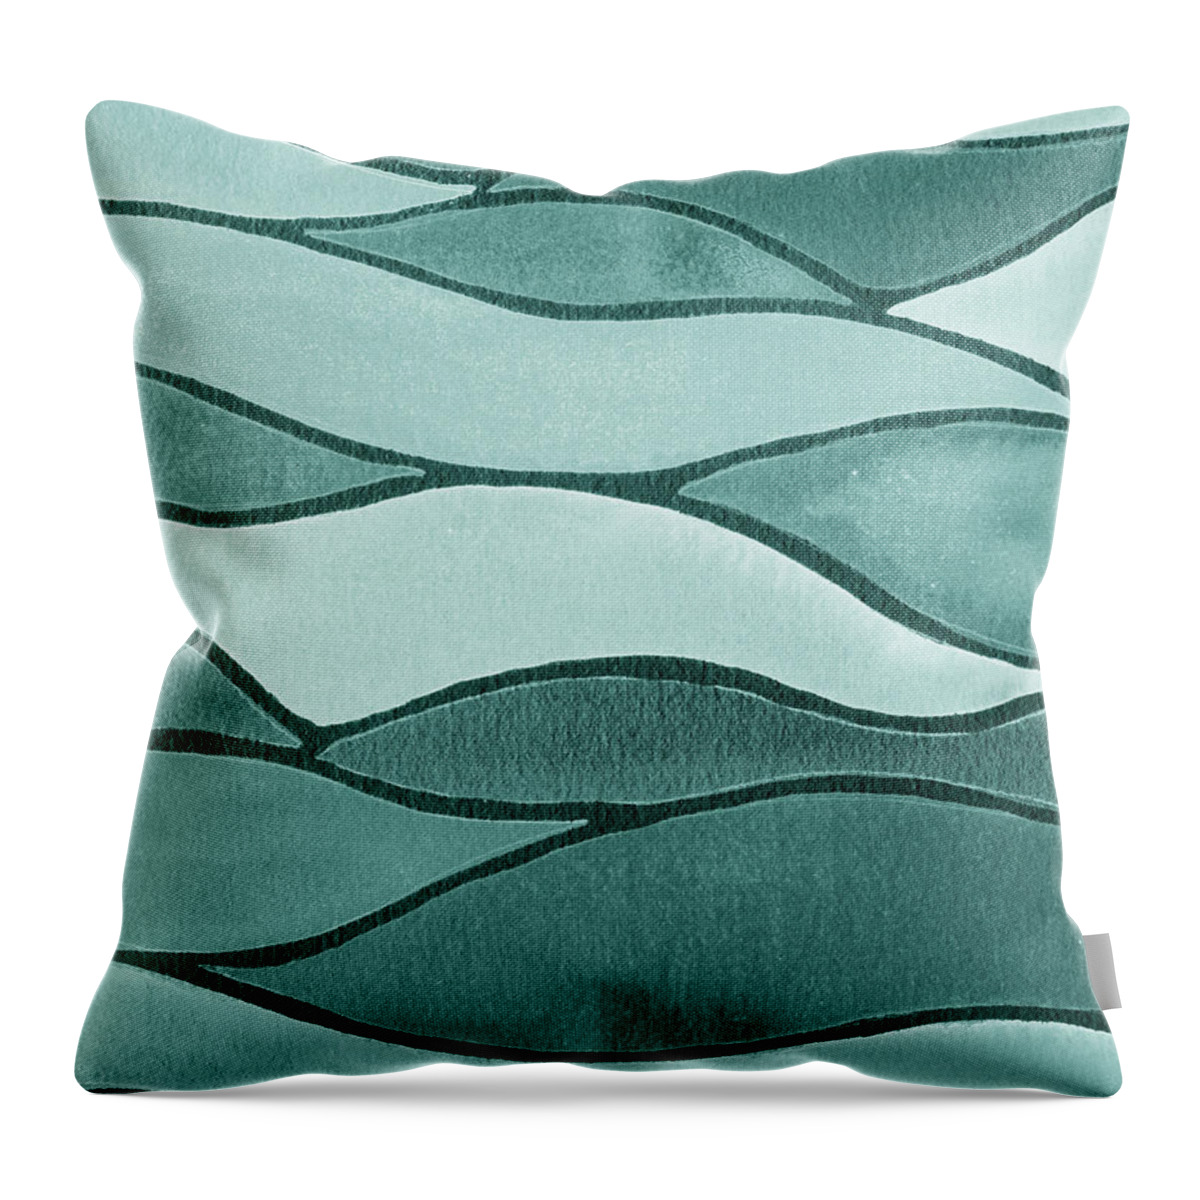 Teal Waves Throw Pillow featuring the painting Soft Gentle Teal Blue Monochrome Watercolor Waves Decor by Irina Sztukowski